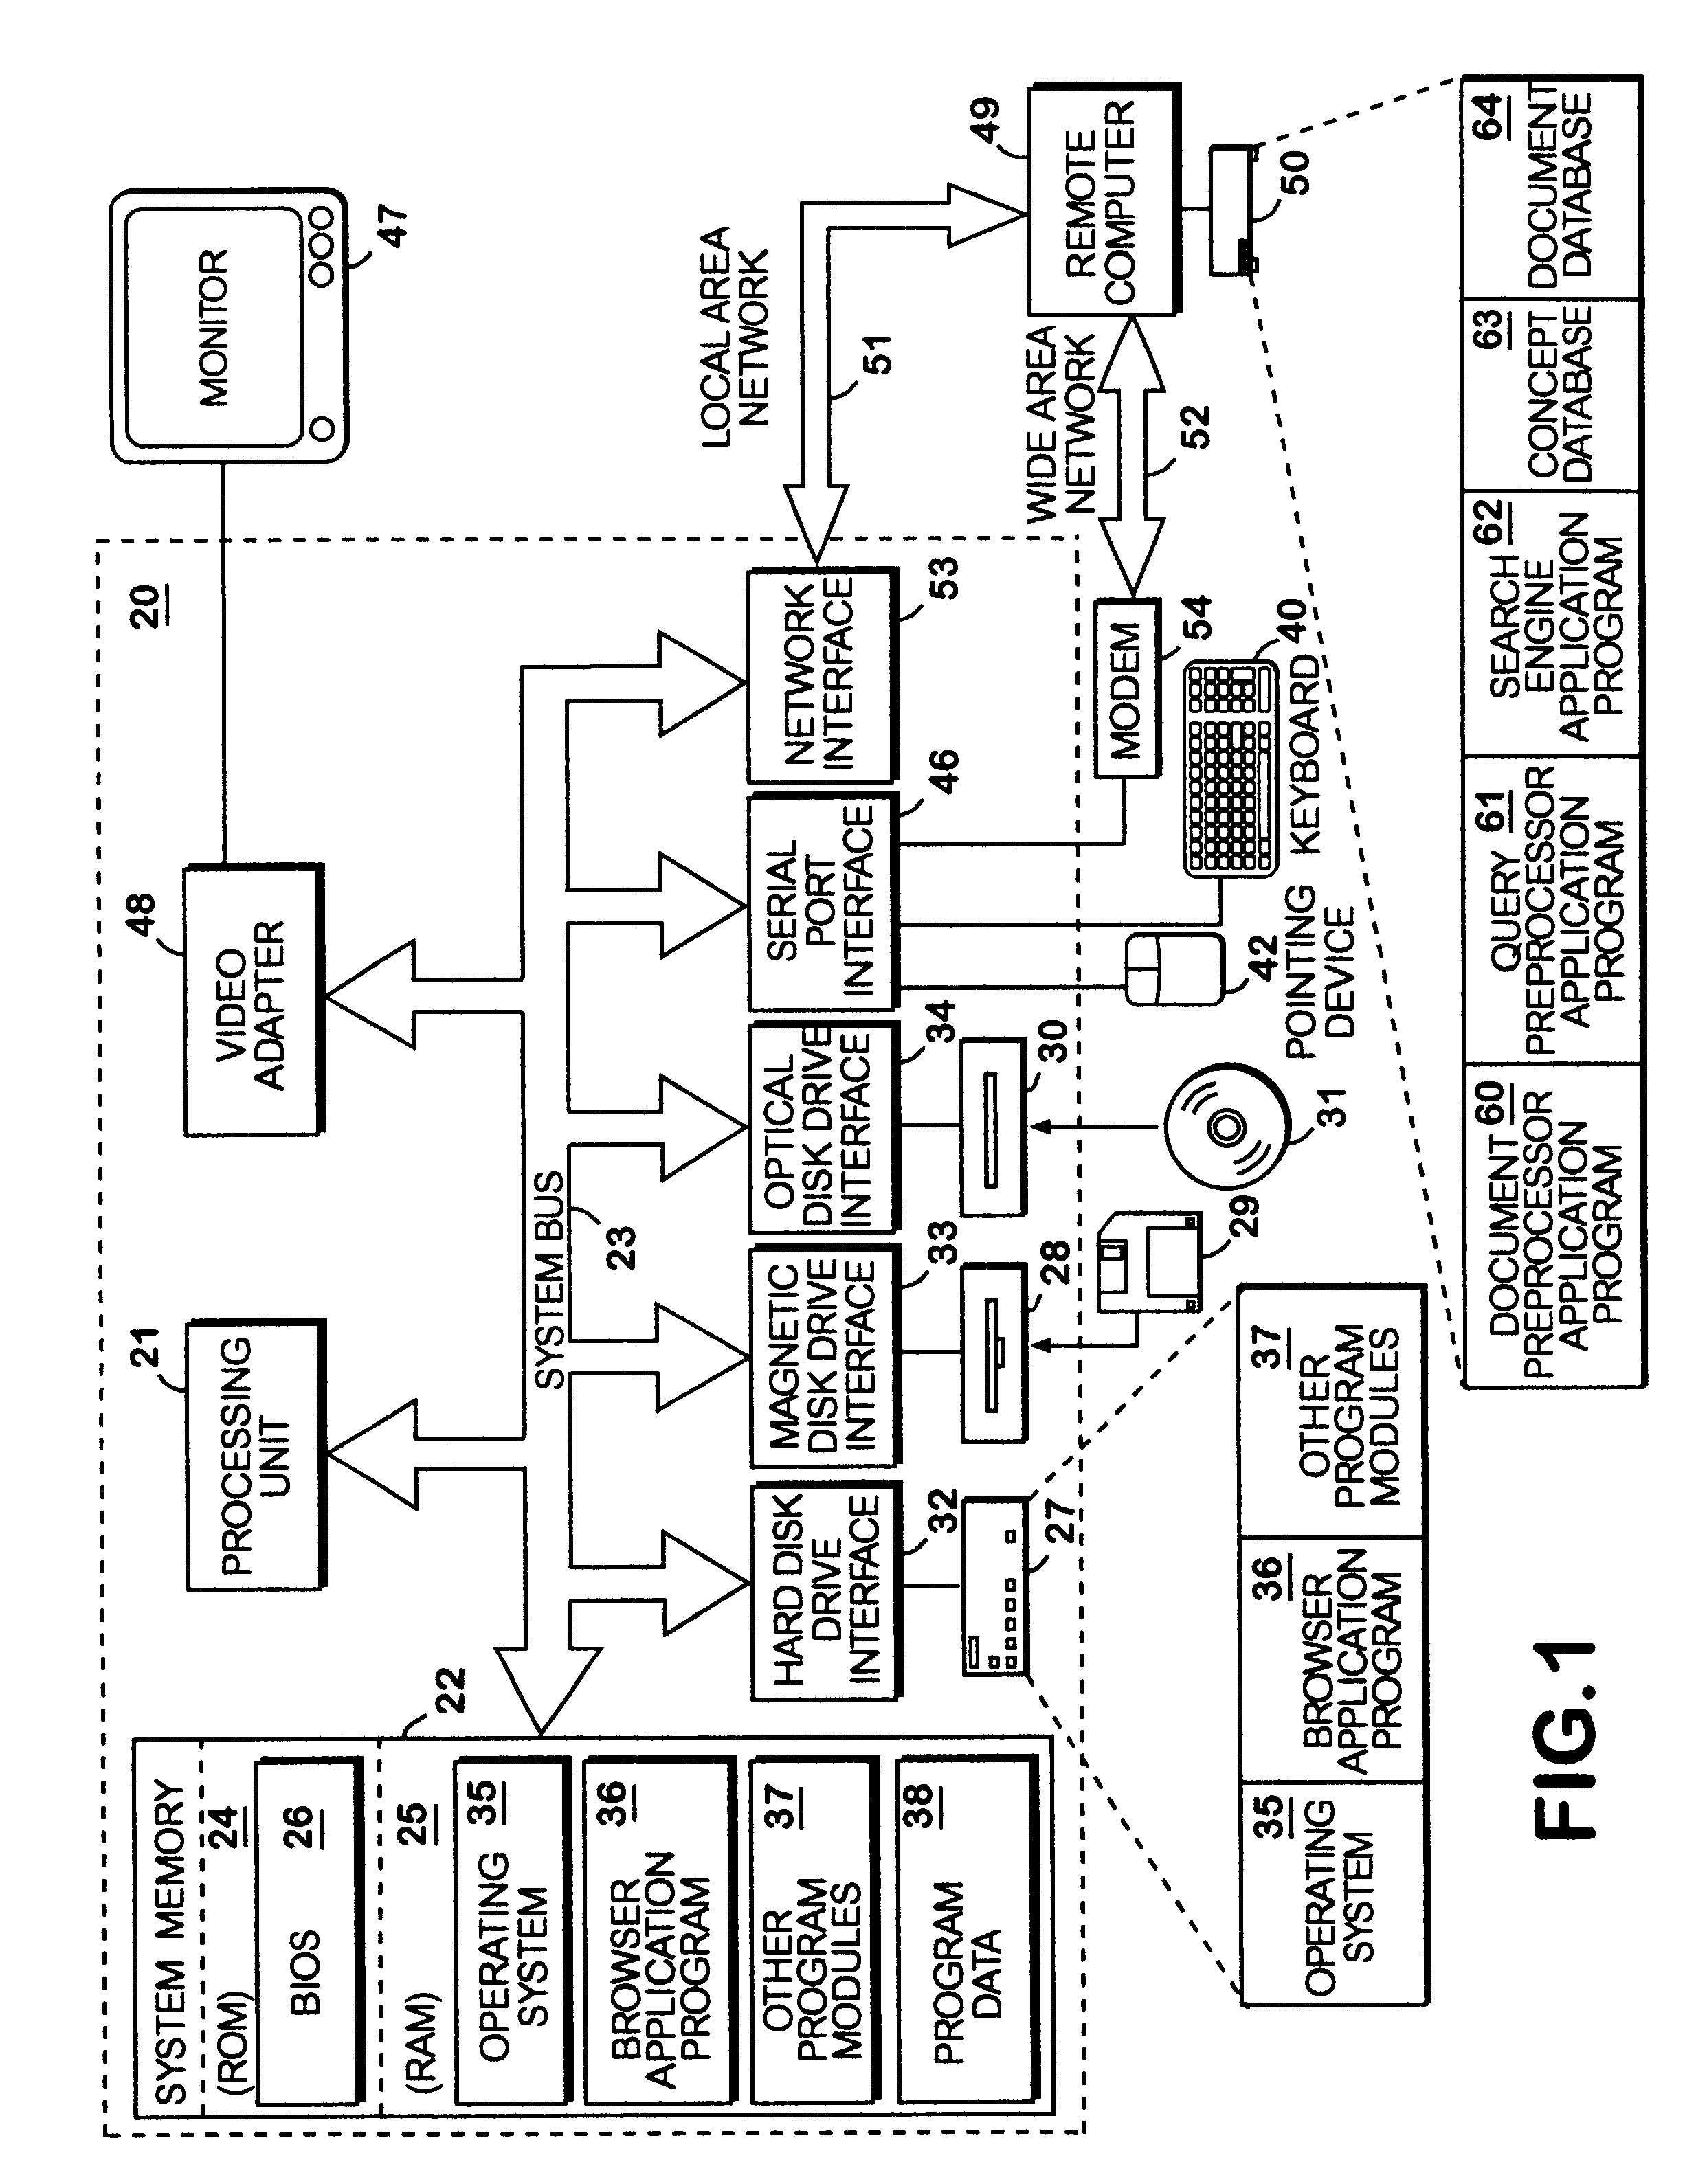 Method and apparatus for concept searching using a Boolean or keyword search engine